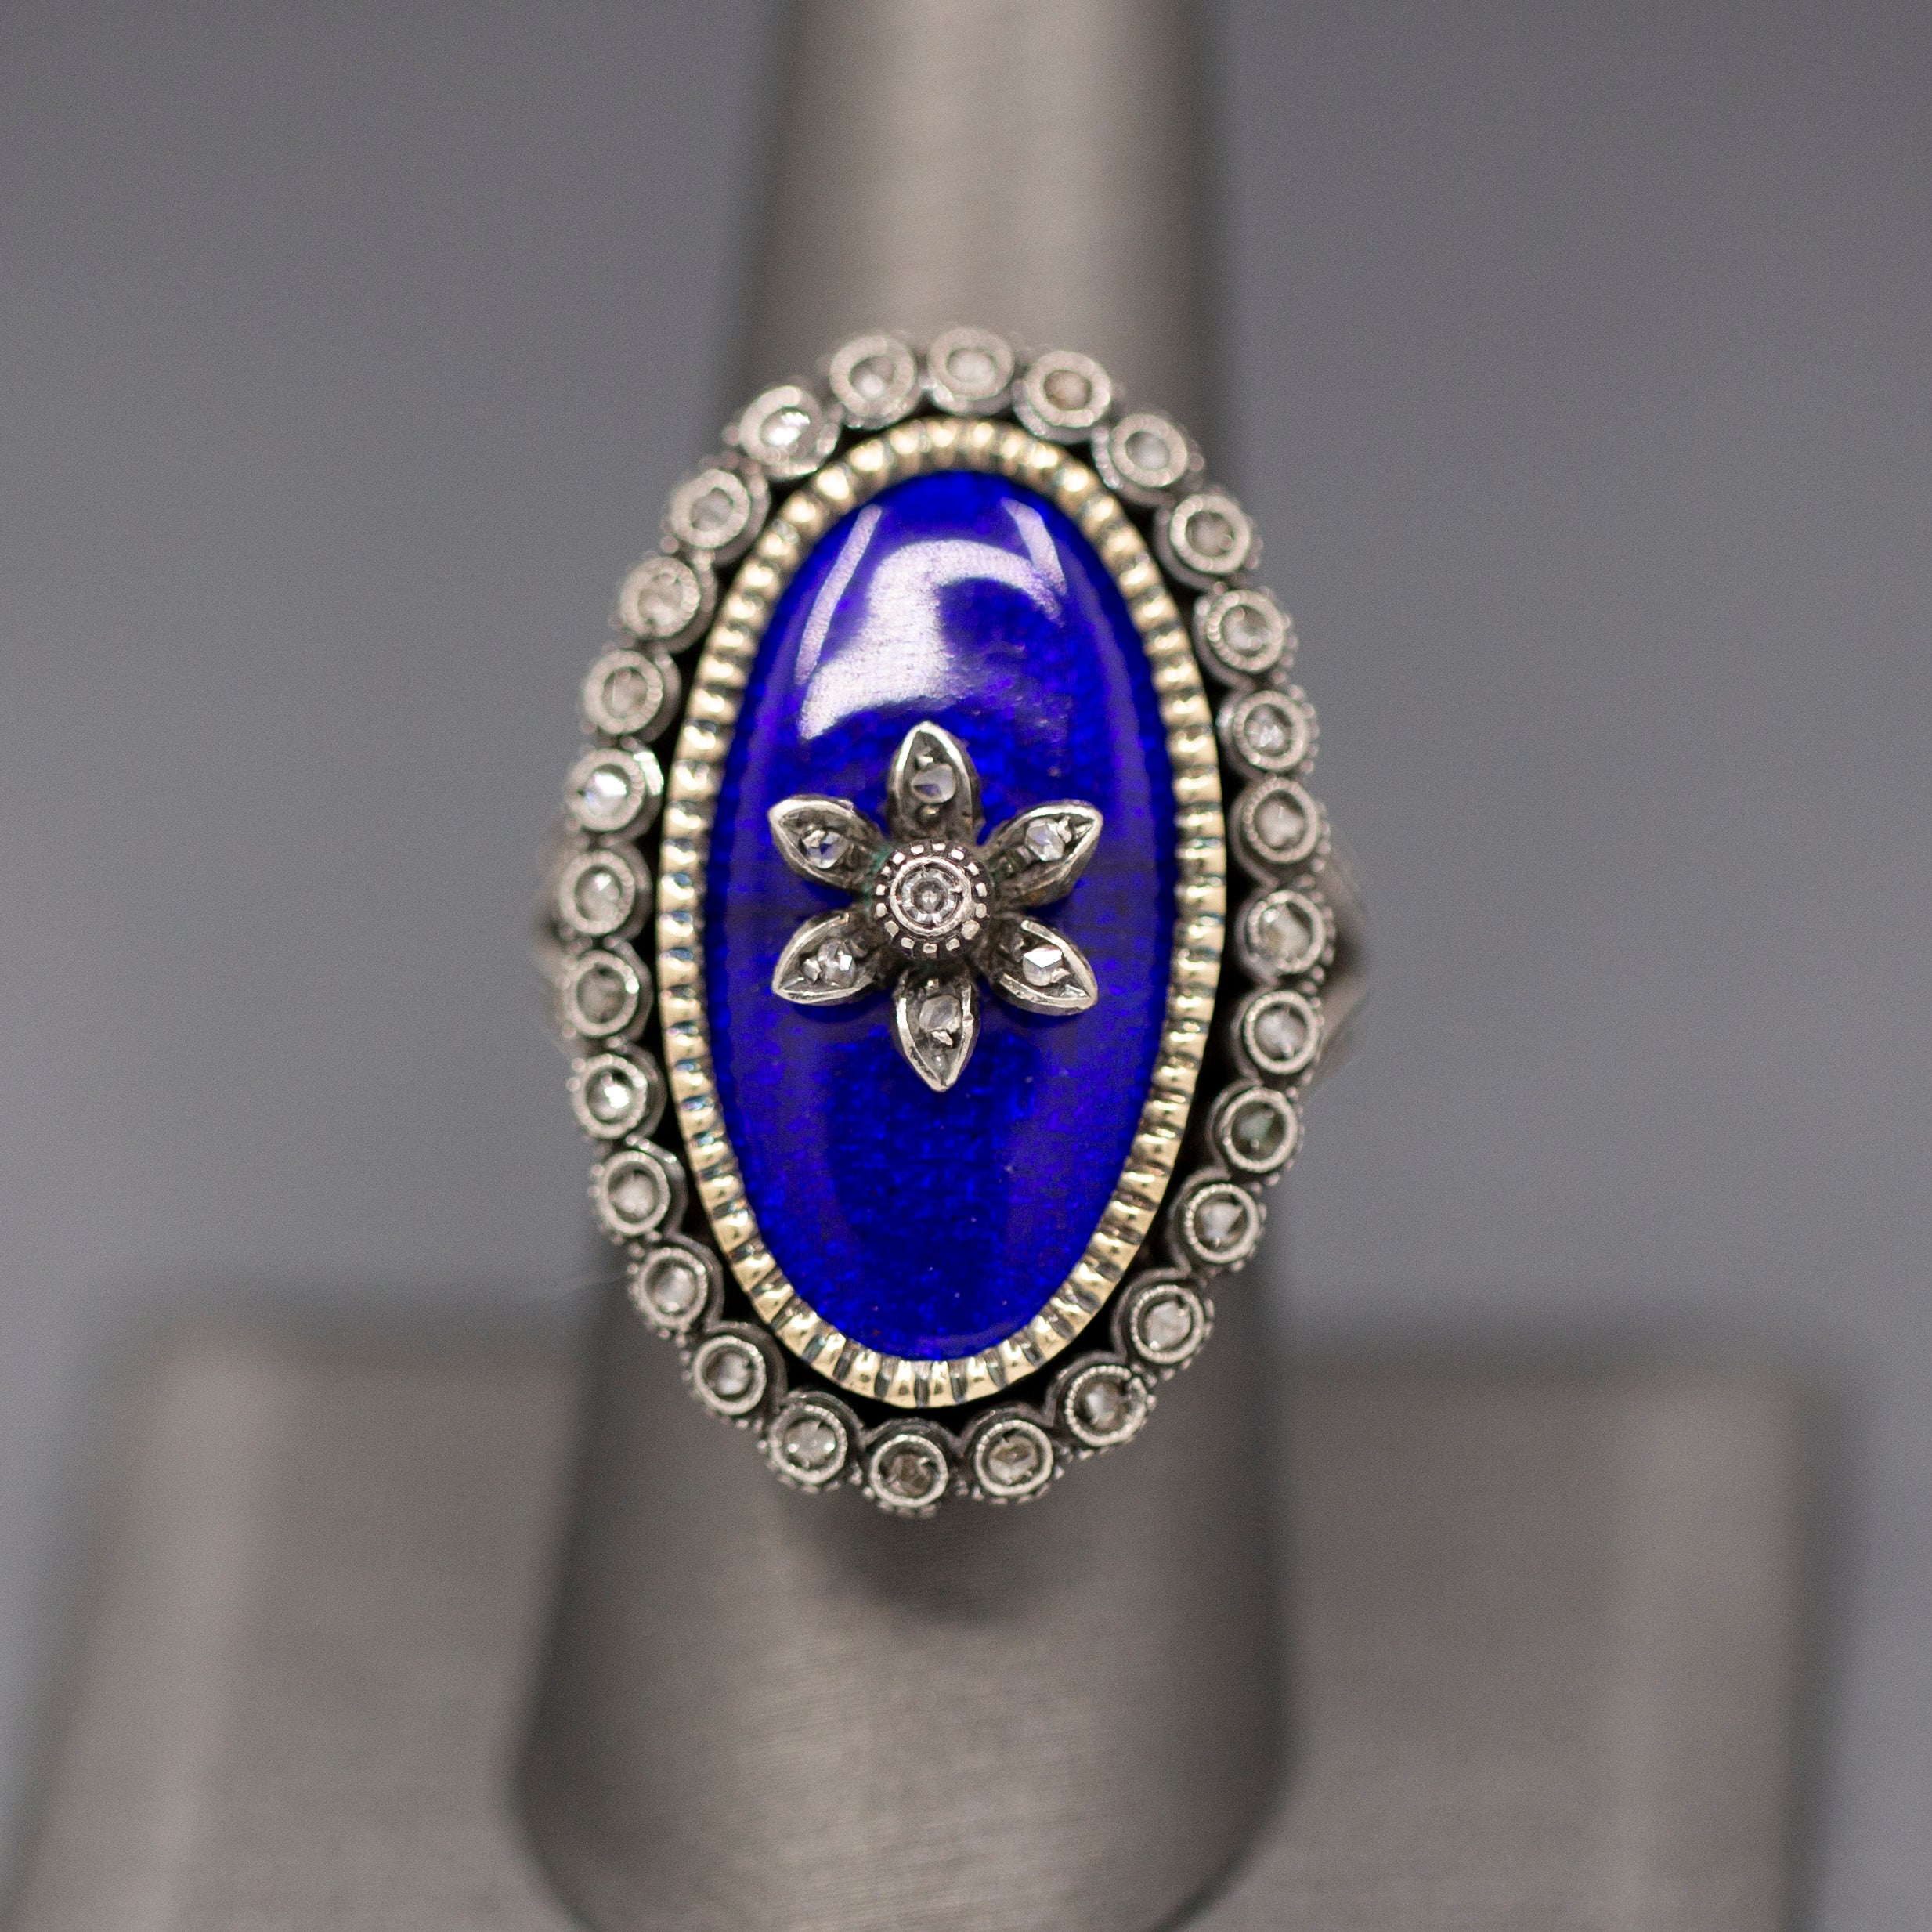 Exquisite Georgian Revival 1920s Blue Enamel and Rose Cut Diamond Ring in Silver and 14k Yellow Gold